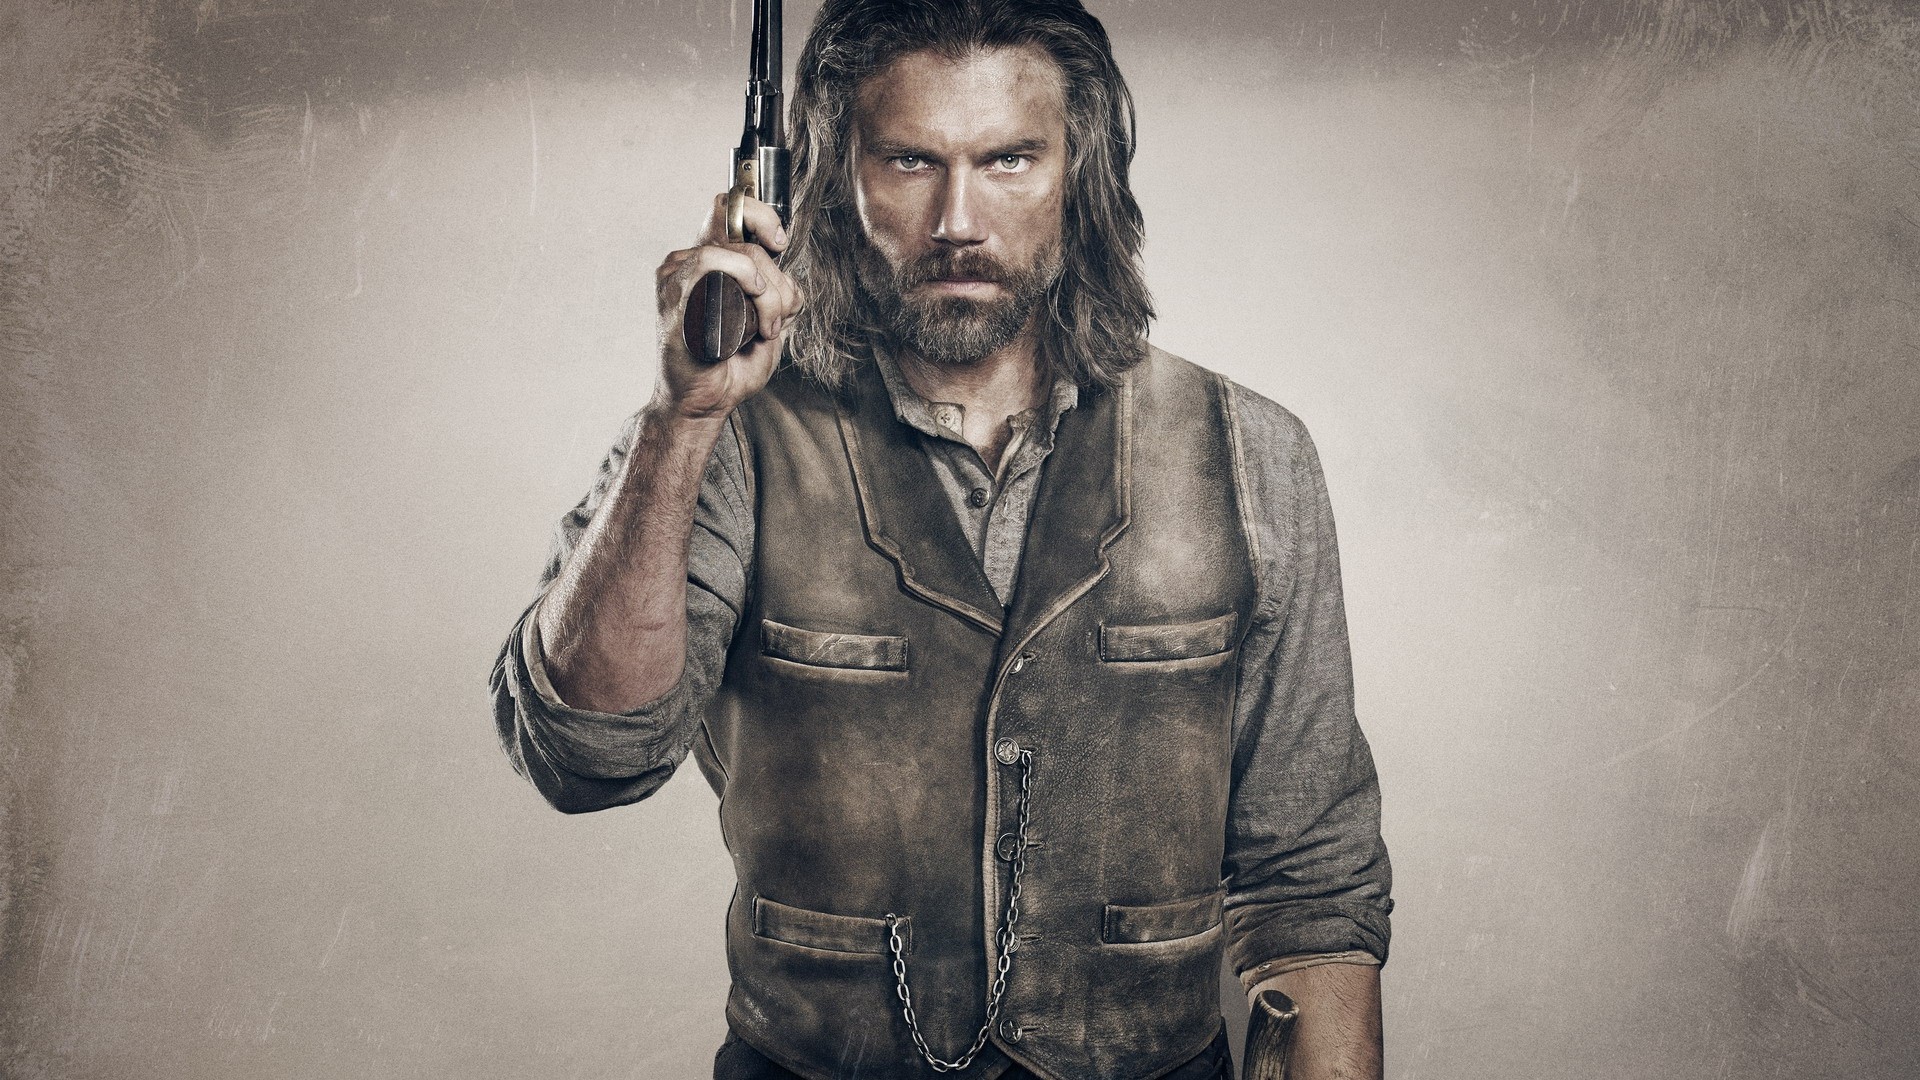 General 1920x1080 Hell on Wheels men revolver western TV series Anson Mount beard frontal view simple background